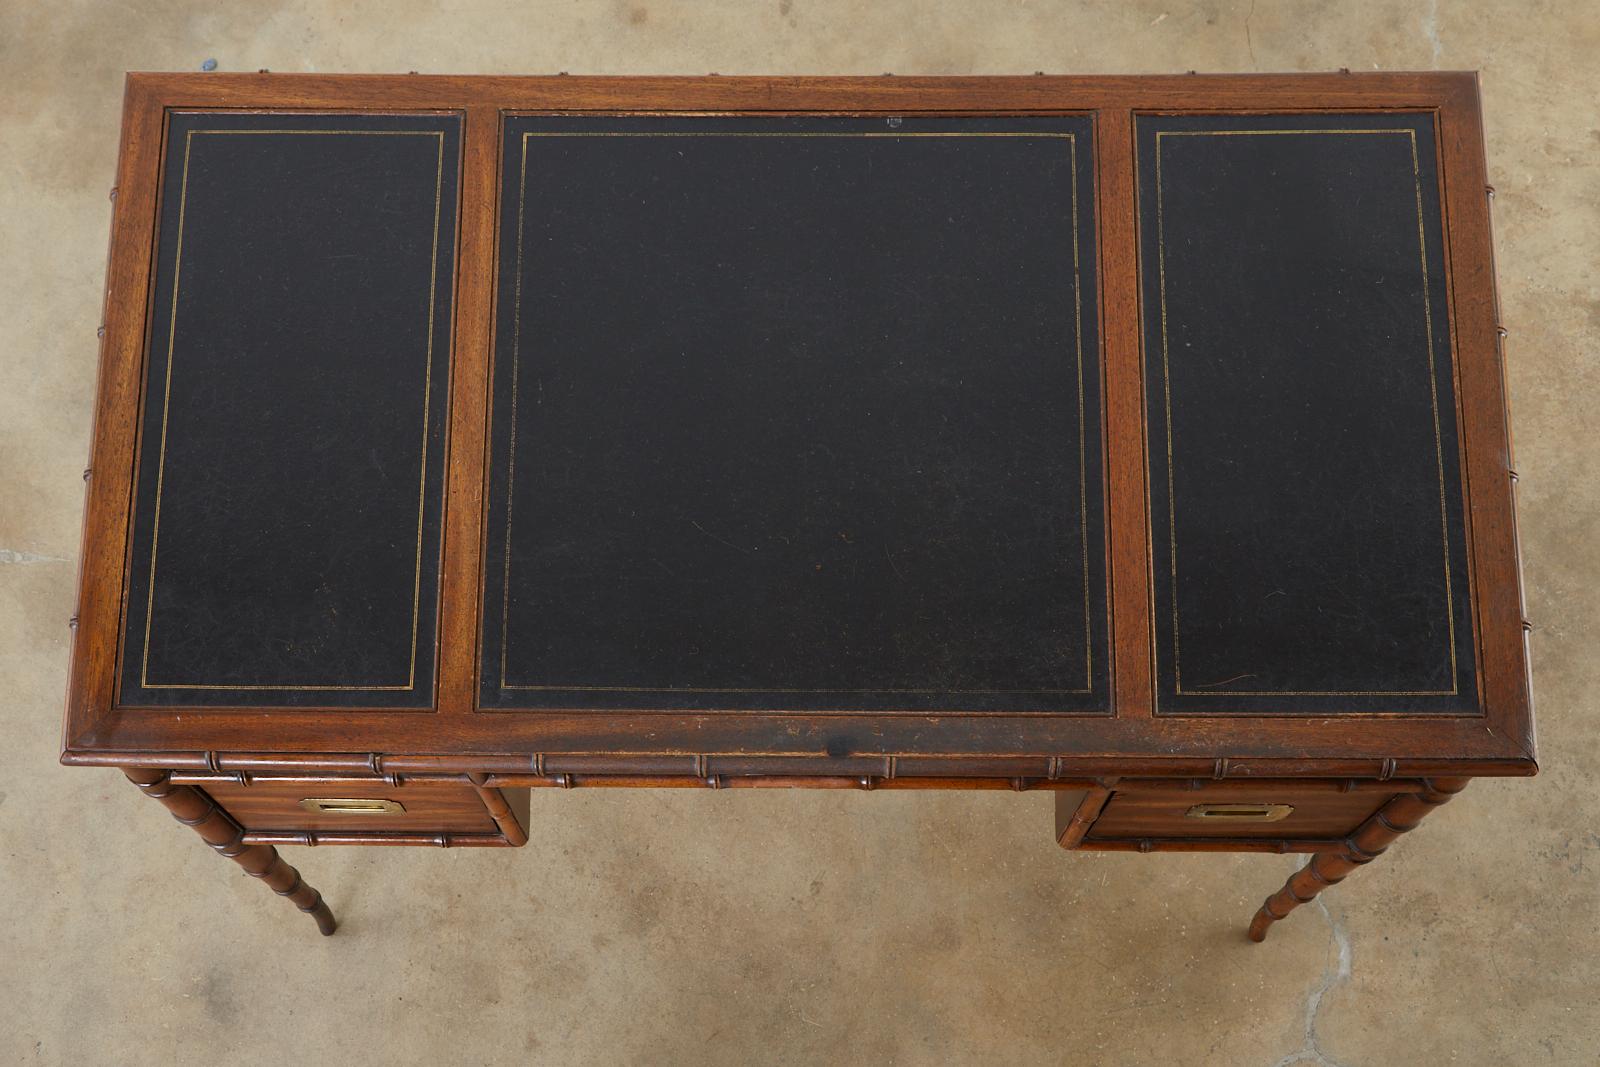 Hollywood Regency Midcentury Faux Bamboo Leather Top Writing Desk by Drexel